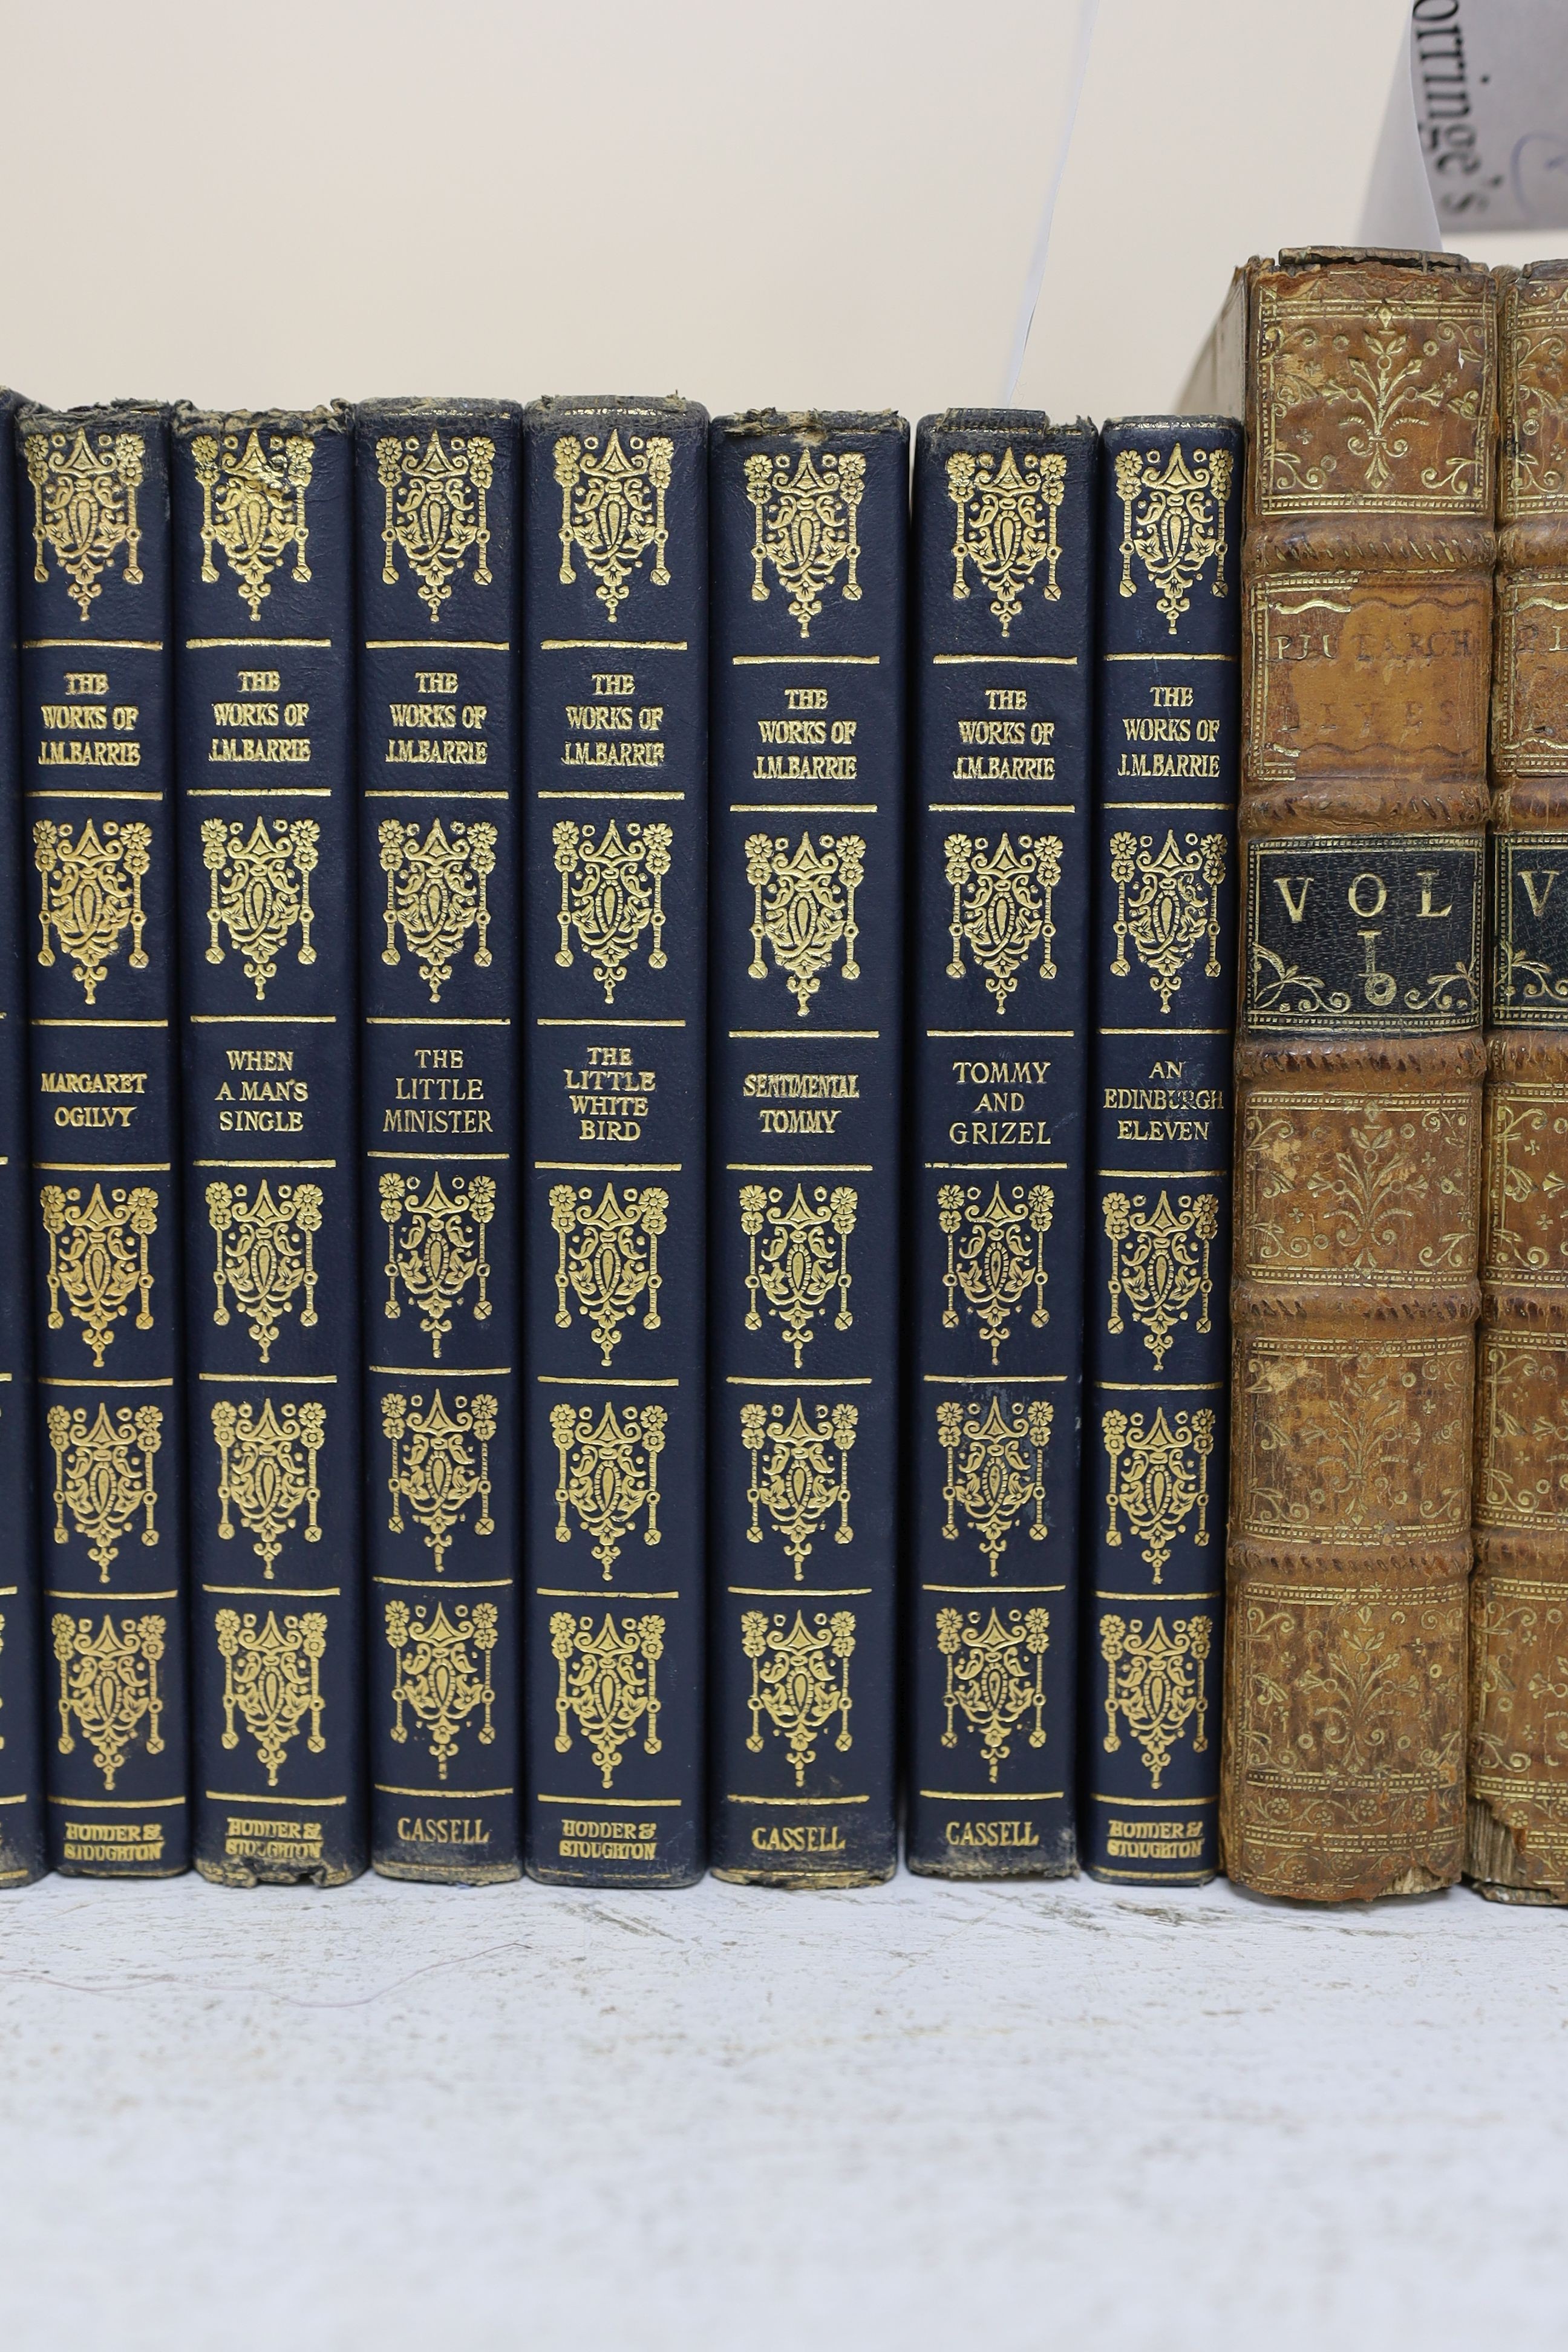 Barrie, J.M - The Plays (10 vols) and The Works (9 vols), uniformly bound in blue leatherette, with gilt lettered and decorated spines, Cassell & Company Ltd; London, 1928-30 (19 vols)